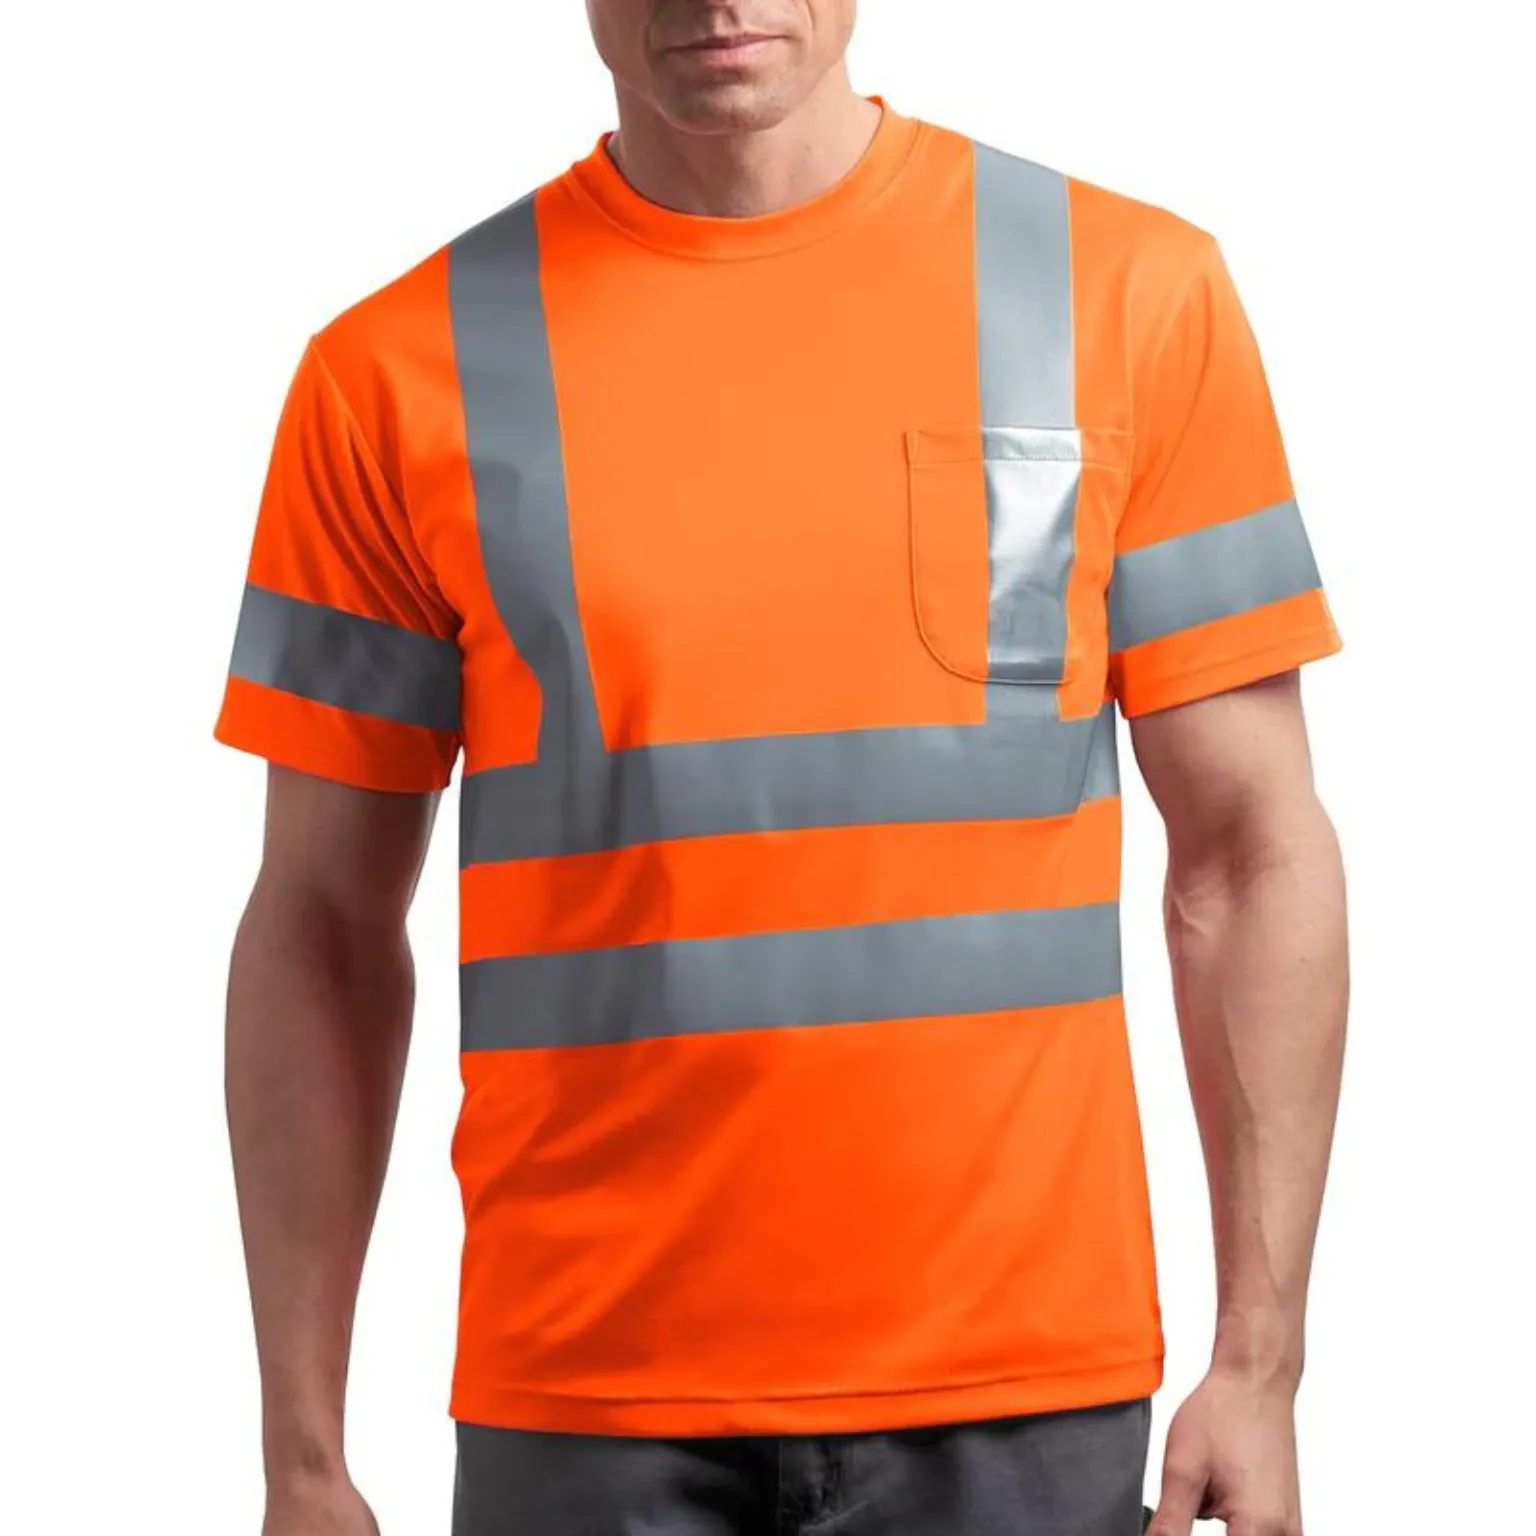 Hi-Vis T-shirt manufacturing with high quality